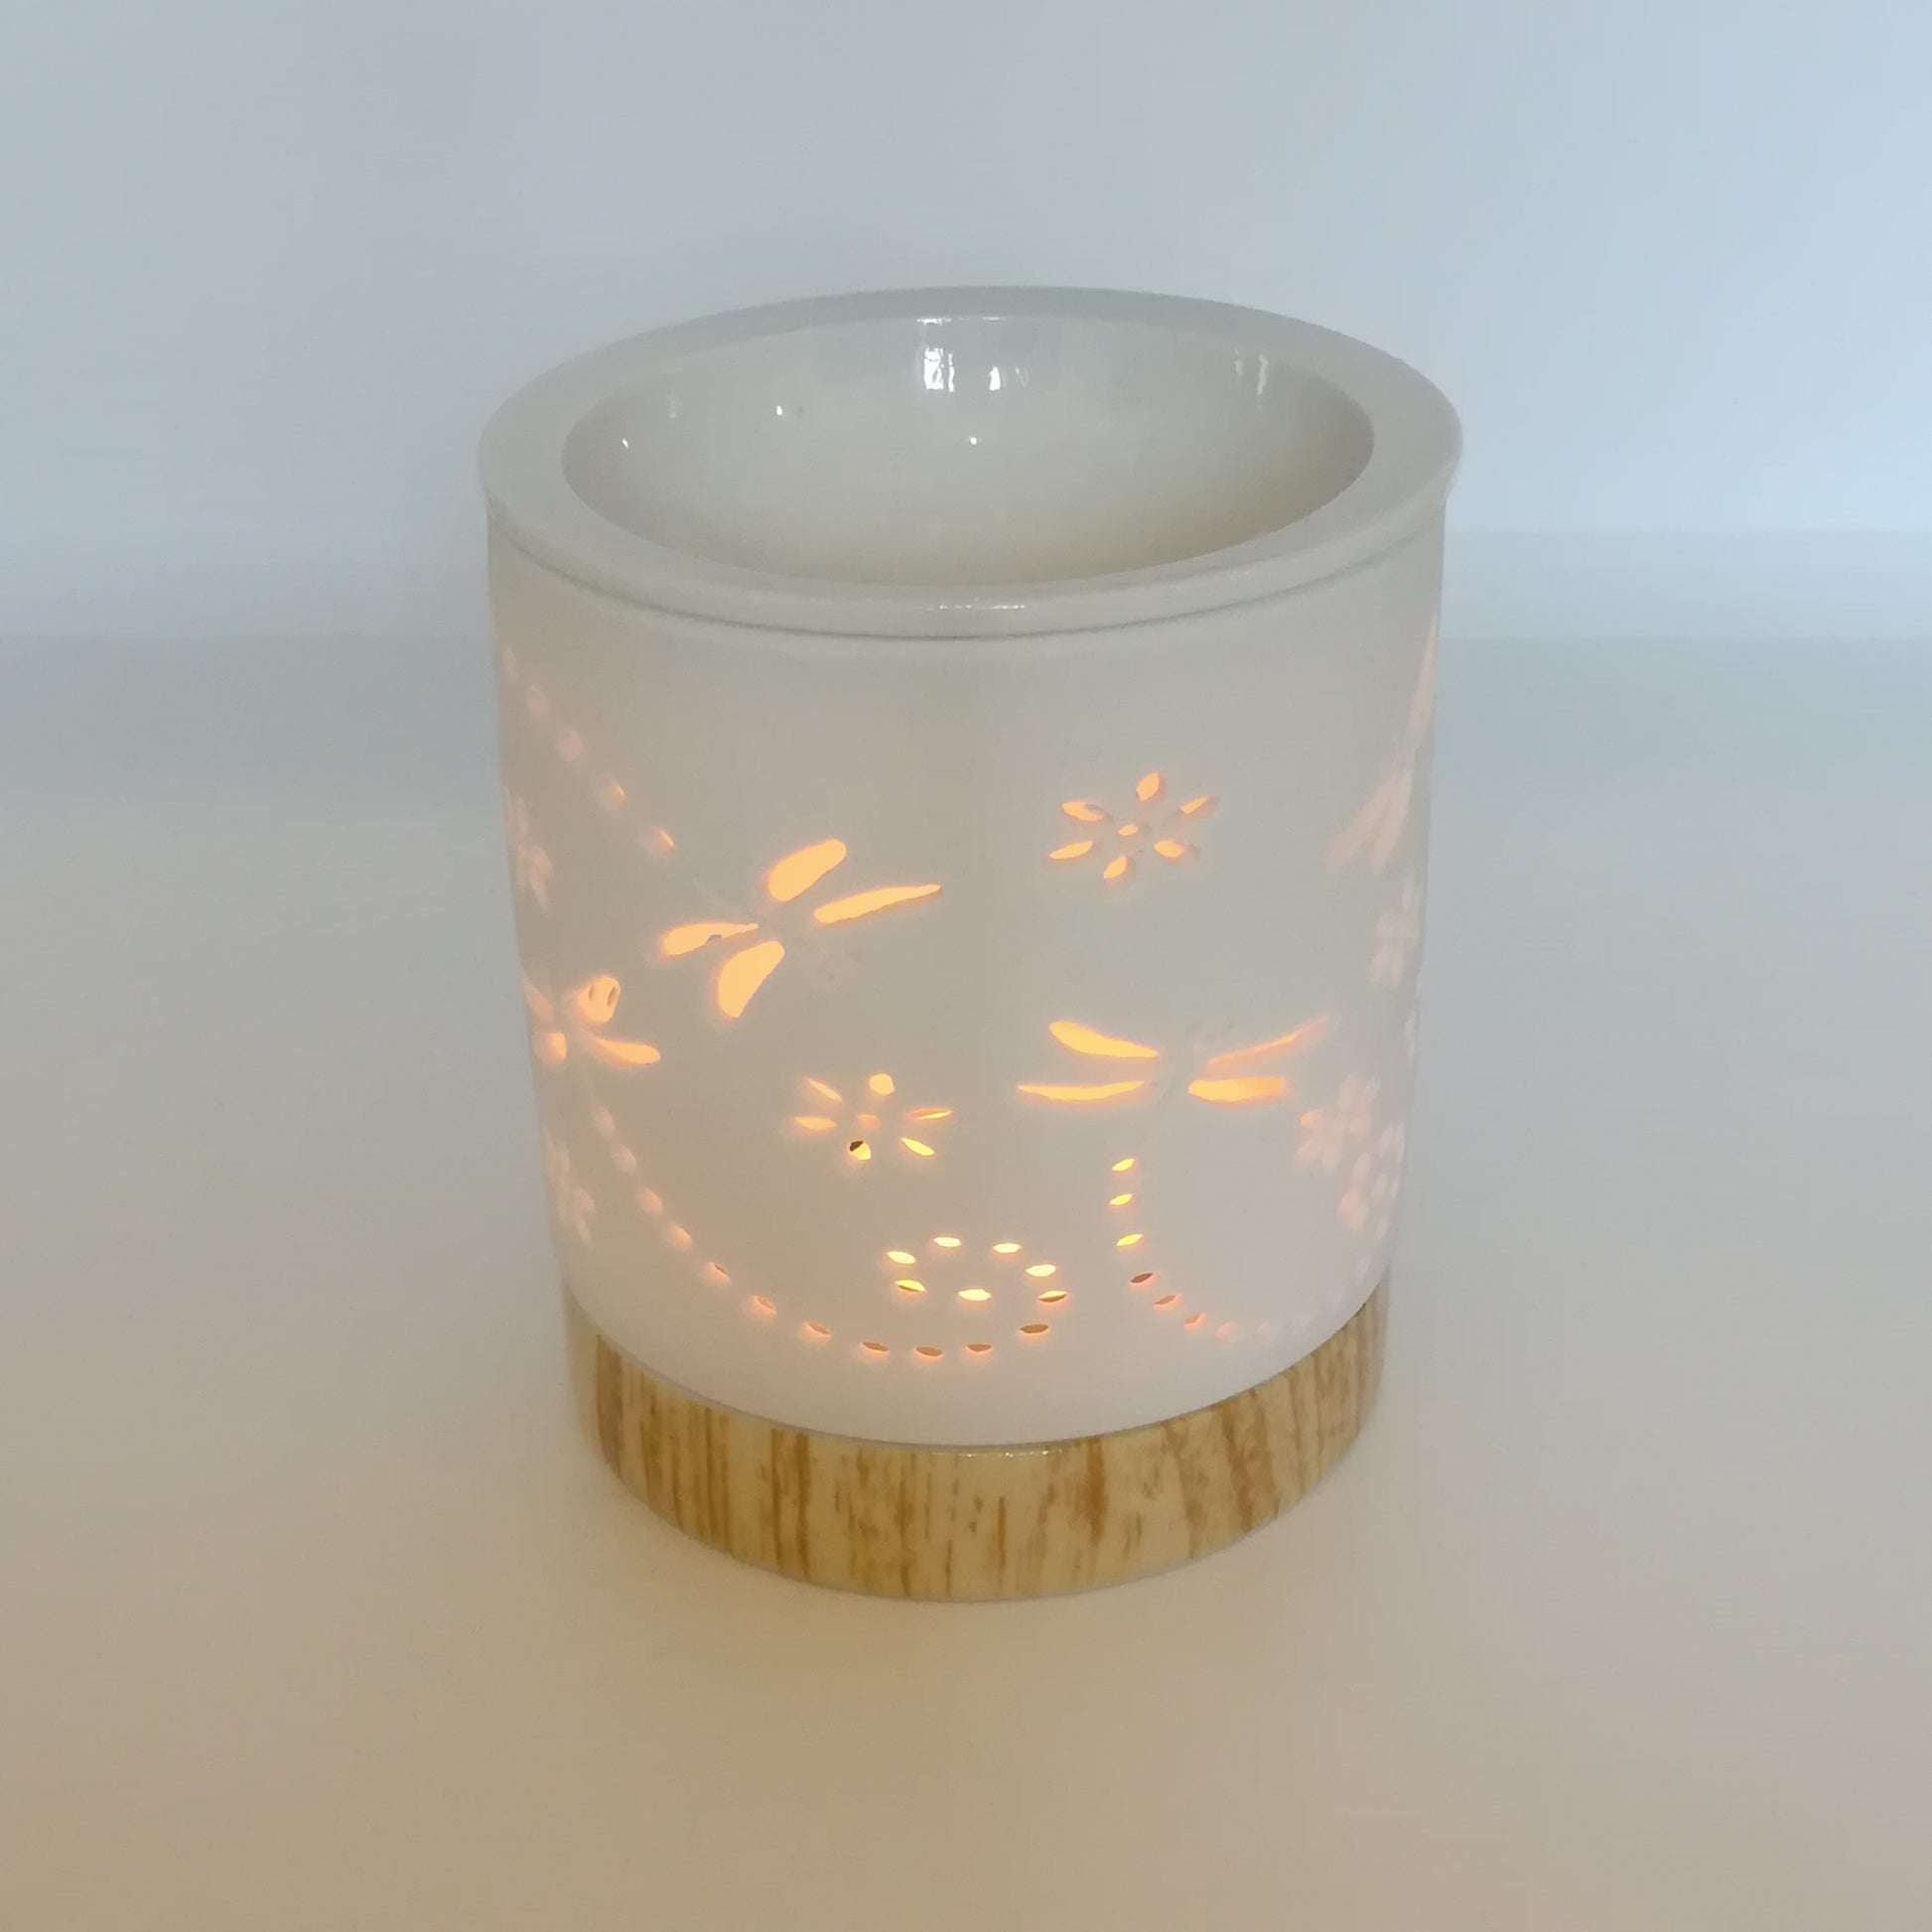 Ceramic white wax melt burner with ceramic wood effect base pictured under natural light with dragonfly apertures illuminated by the tealight within. (Tealight not included).